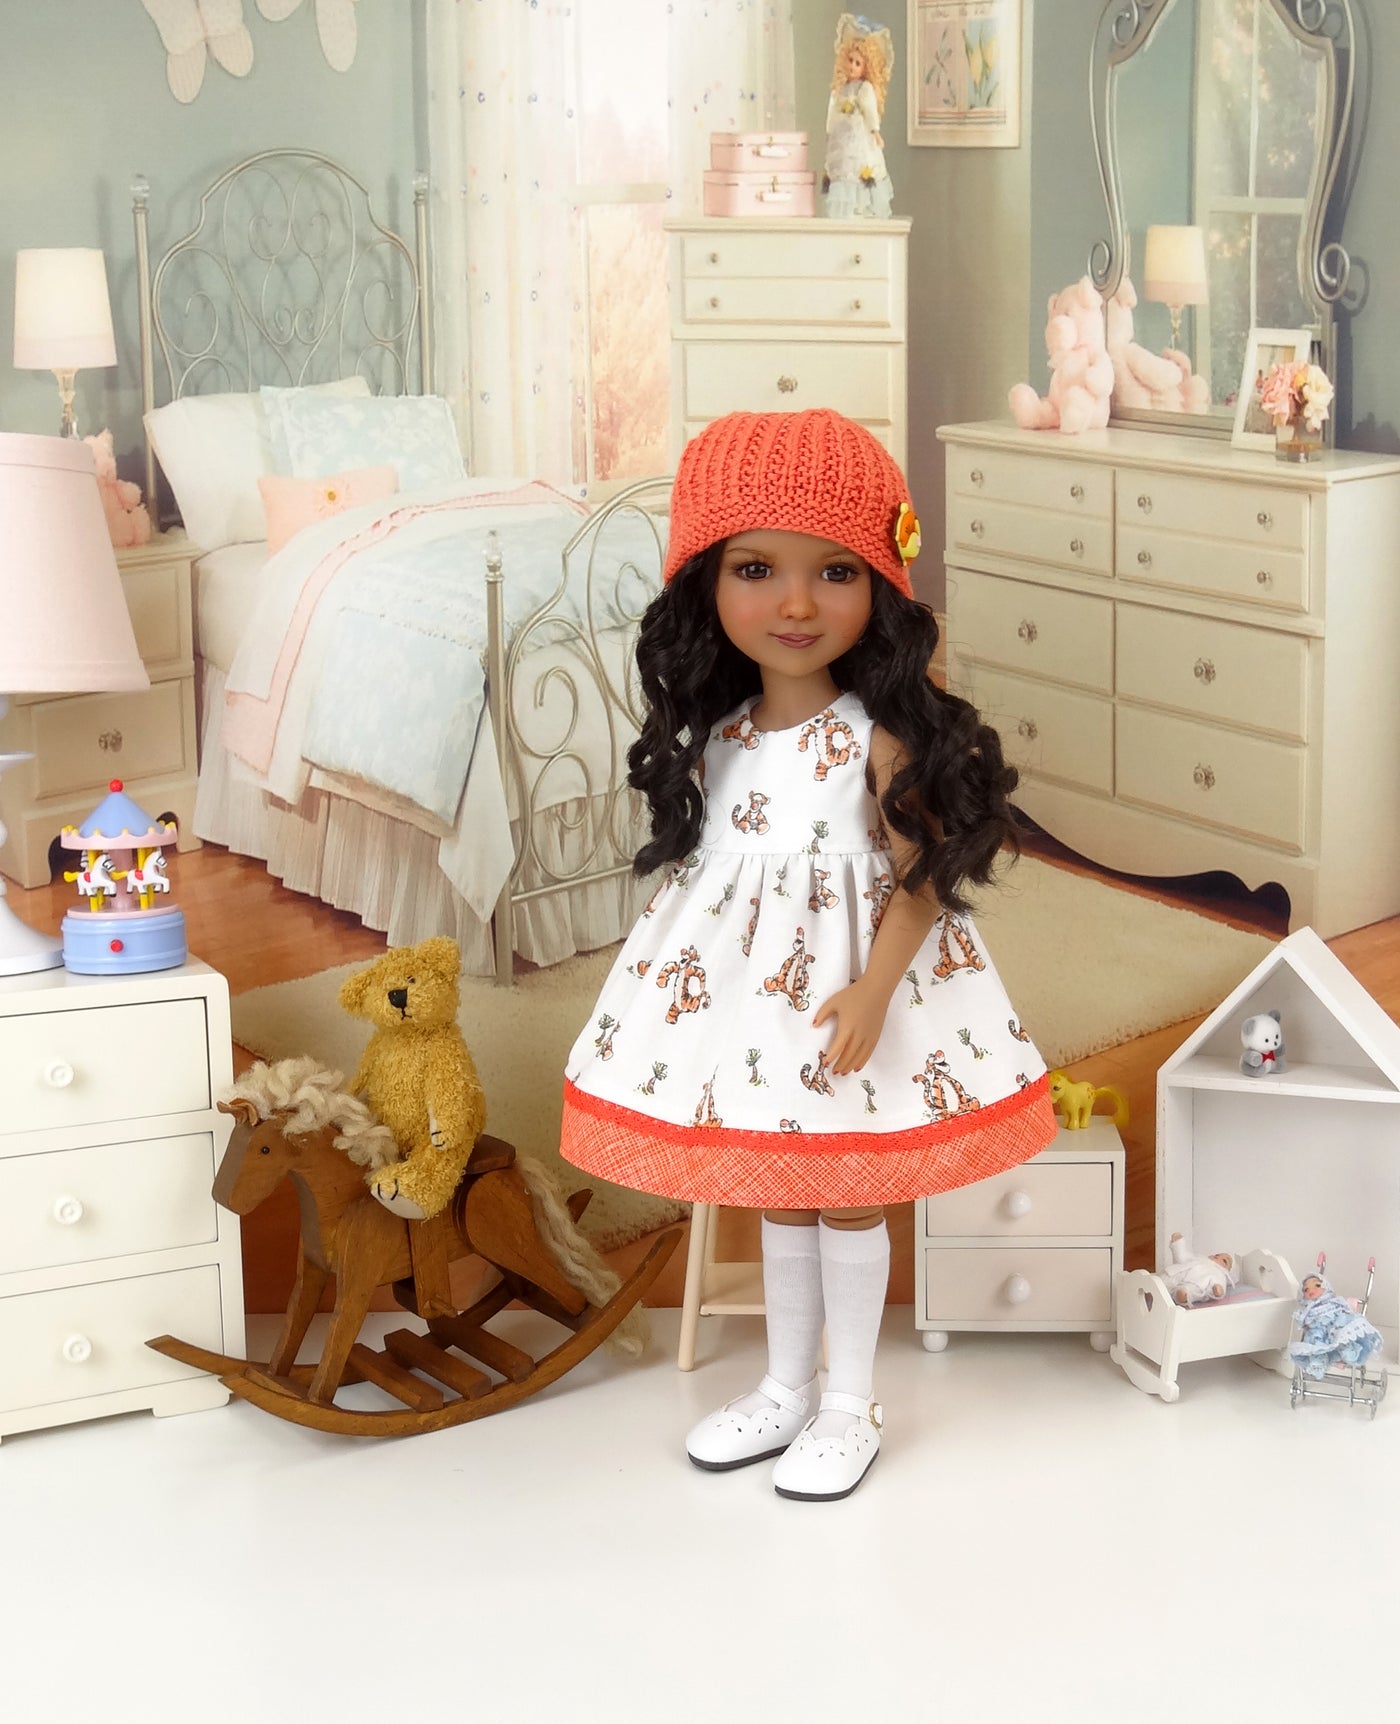 Tiny Tigger - dress and sweater with shoes for Ruby Red Fashion Friends doll